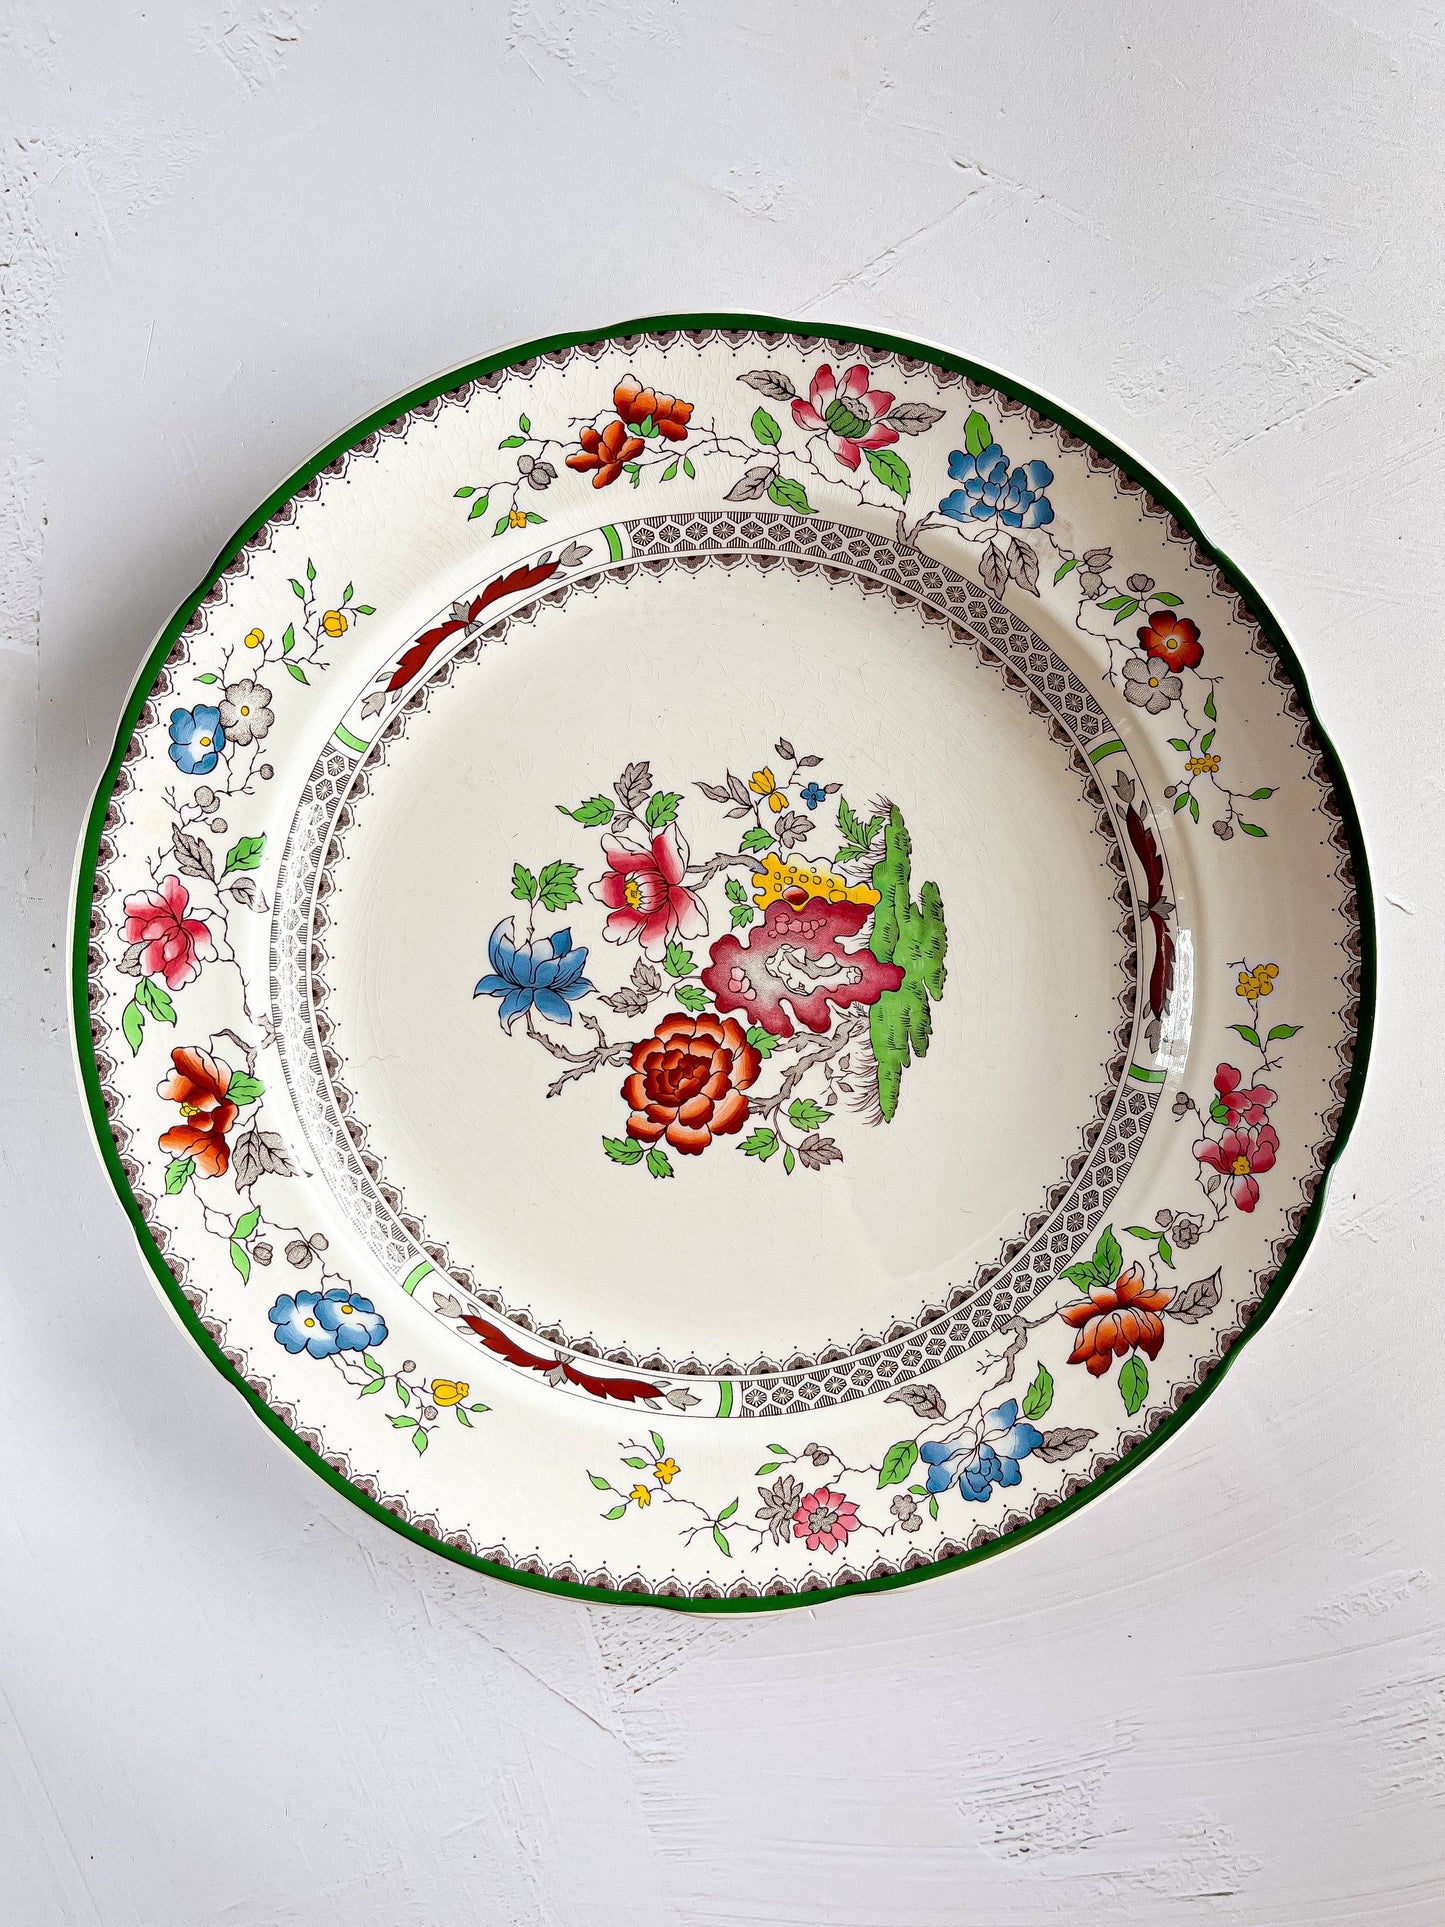 Spode Set of 6 Dinner Plates - 'Chinese Rose' Collection - SOSC Home